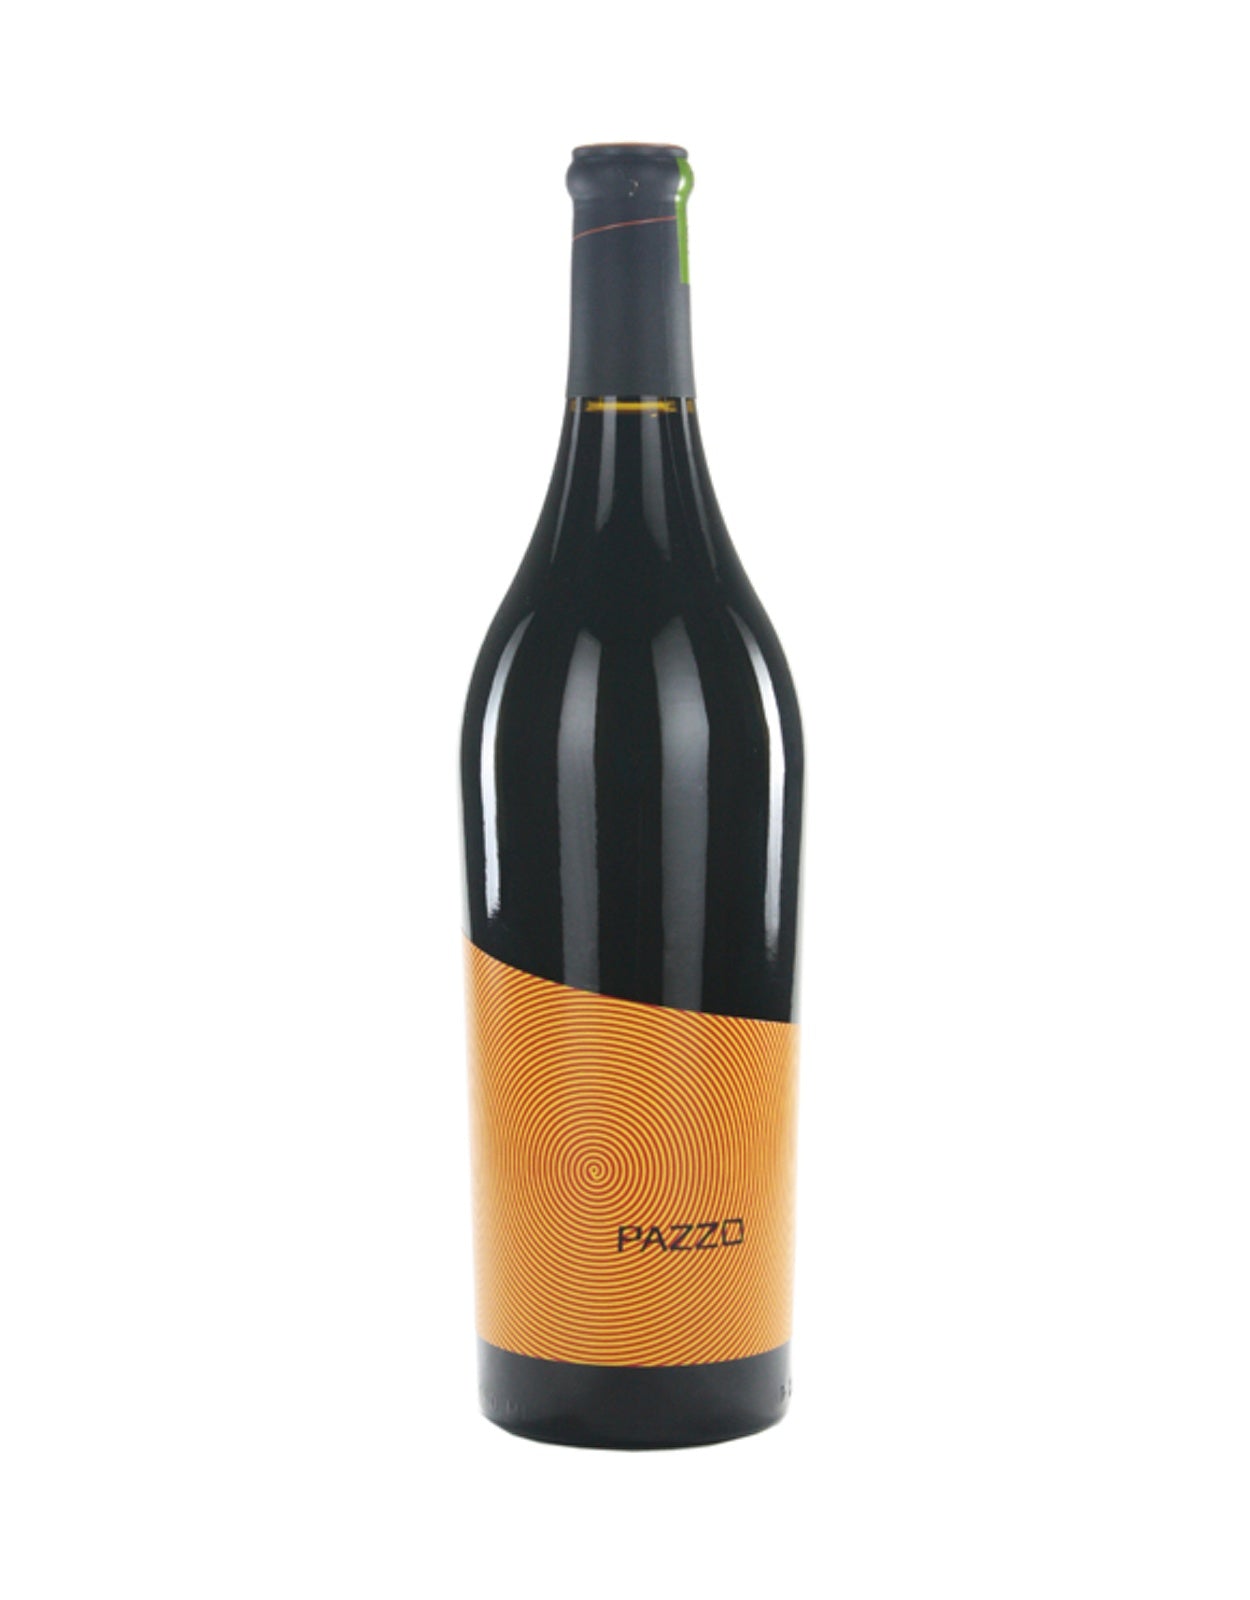 Pazzo Red Blend 2021